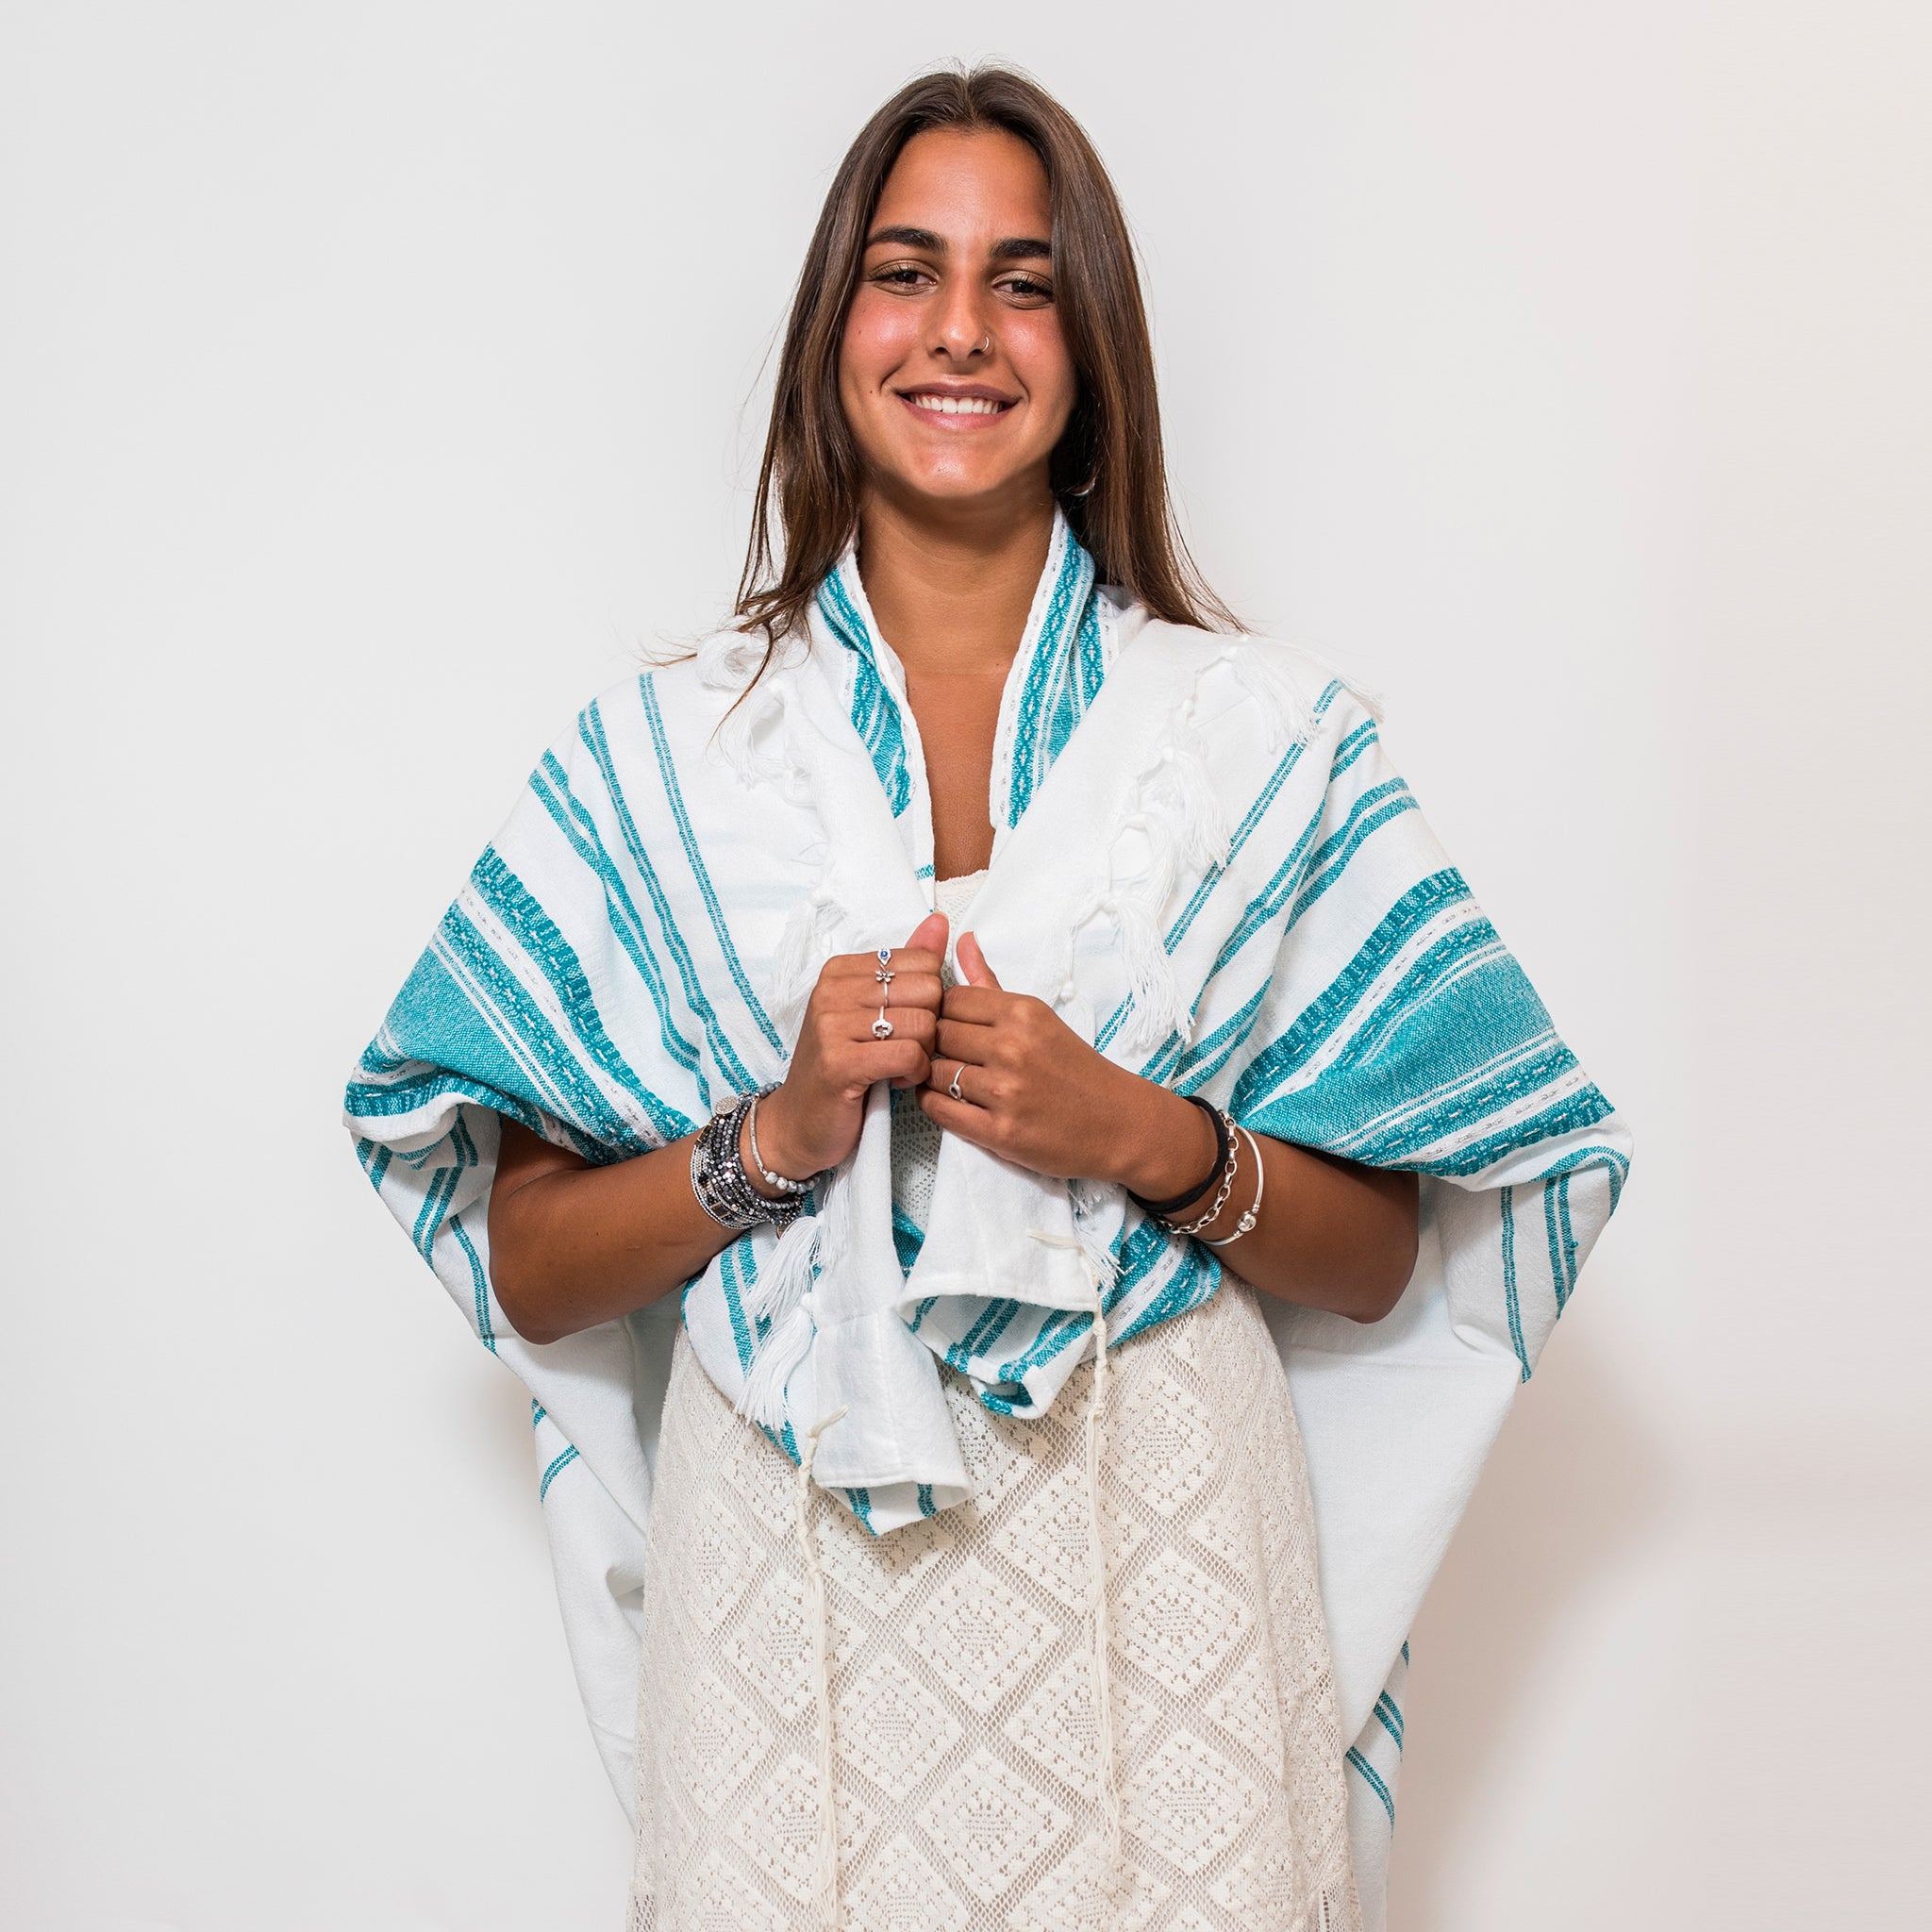 Samuel - Wool Tallit  - Turquoise and Silver on White